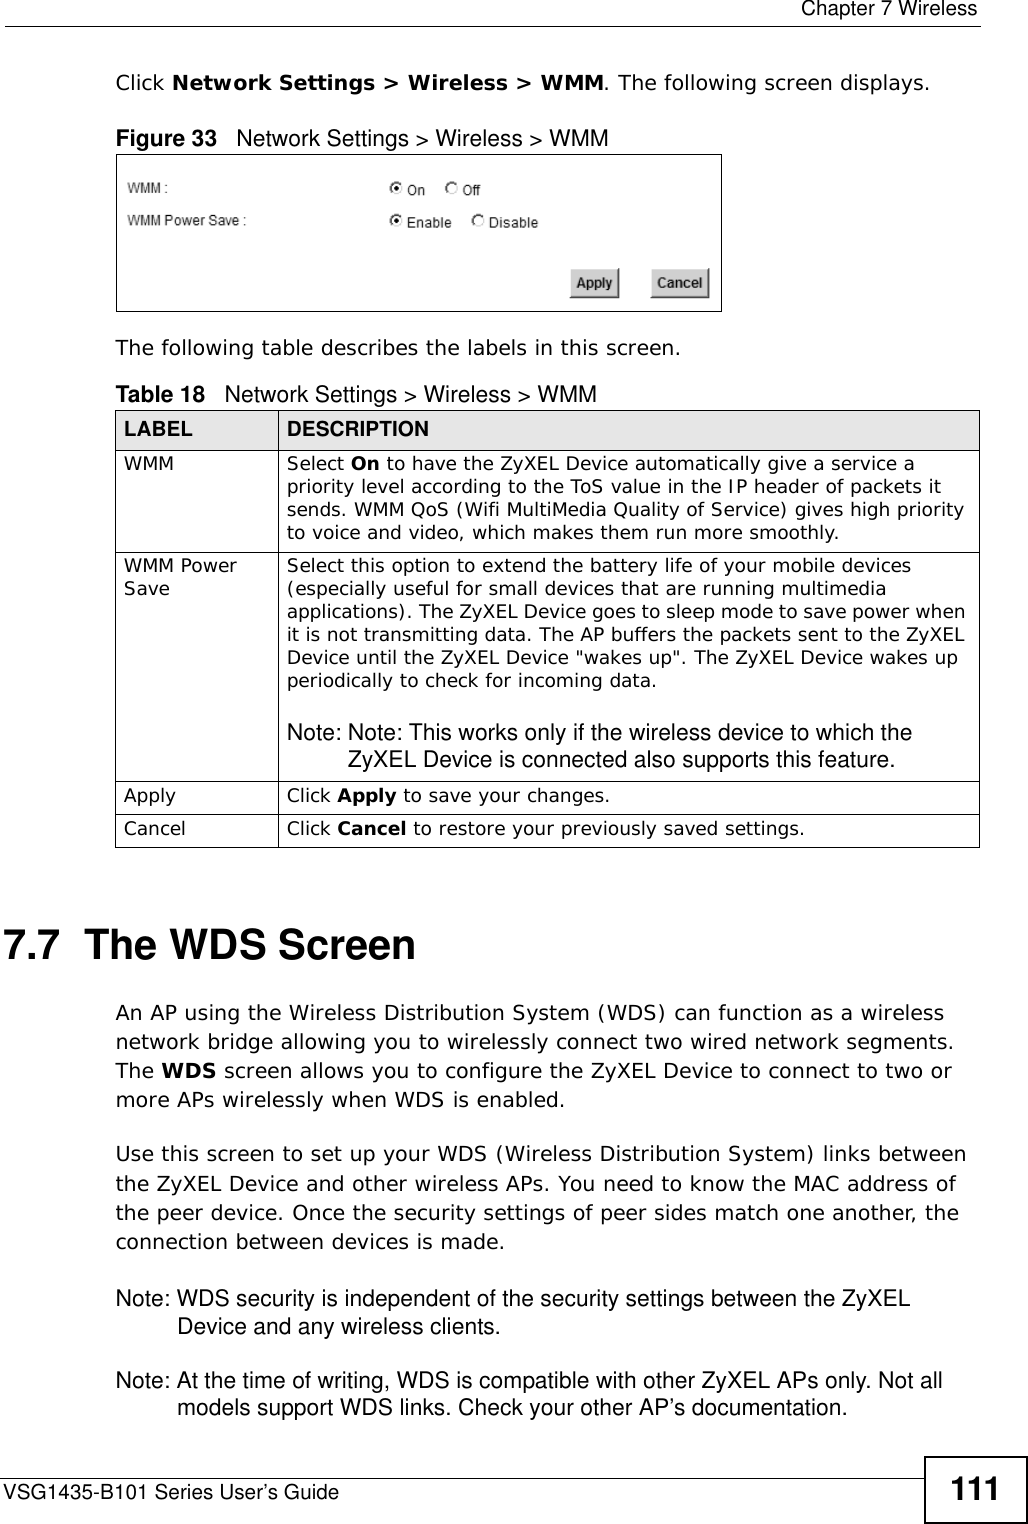  Chapter 7 WirelessVSG1435-B101 Series User’s Guide 111Click Network Settings &gt; Wireless &gt; WMM. The following screen displays.Figure 33   Network Settings &gt; Wireless &gt; WMMThe following table describes the labels in this screen.7.7  The WDS ScreenAn AP using the Wireless Distribution System (WDS) can function as a wireless network bridge allowing you to wirelessly connect two wired network segments. The WDS screen allows you to configure the ZyXEL Device to connect to two or more APs wirelessly when WDS is enabled. Use this screen to set up your WDS (Wireless Distribution System) links between the ZyXEL Device and other wireless APs. You need to know the MAC address of the peer device. Once the security settings of peer sides match one another, the connection between devices is made. Note: WDS security is independent of the security settings between the ZyXEL Device and any wireless clients.Note: At the time of writing, WDS is compatible with other ZyXEL APs only. Not all models support WDS links. Check your other AP’s documentation.Table 18   Network Settings &gt; Wireless &gt; WMMLABEL DESCRIPTIONWMM Select On to have the ZyXEL Device automatically give a service a priority level according to the ToS value in the IP header of packets it sends. WMM QoS (Wifi MultiMedia Quality of Service) gives high priority to voice and video, which makes them run more smoothly.WMM Power Save Select this option to extend the battery life of your mobile devices (especially useful for small devices that are running multimedia applications). The ZyXEL Device goes to sleep mode to save power when it is not transmitting data. The AP buffers the packets sent to the ZyXEL Device until the ZyXEL Device &quot;wakes up&quot;. The ZyXEL Device wakes up periodically to check for incoming data.Note: Note: This works only if the wireless device to which the ZyXEL Device is connected also supports this feature.Apply Click Apply to save your changes.Cancel Click Cancel to restore your previously saved settings.